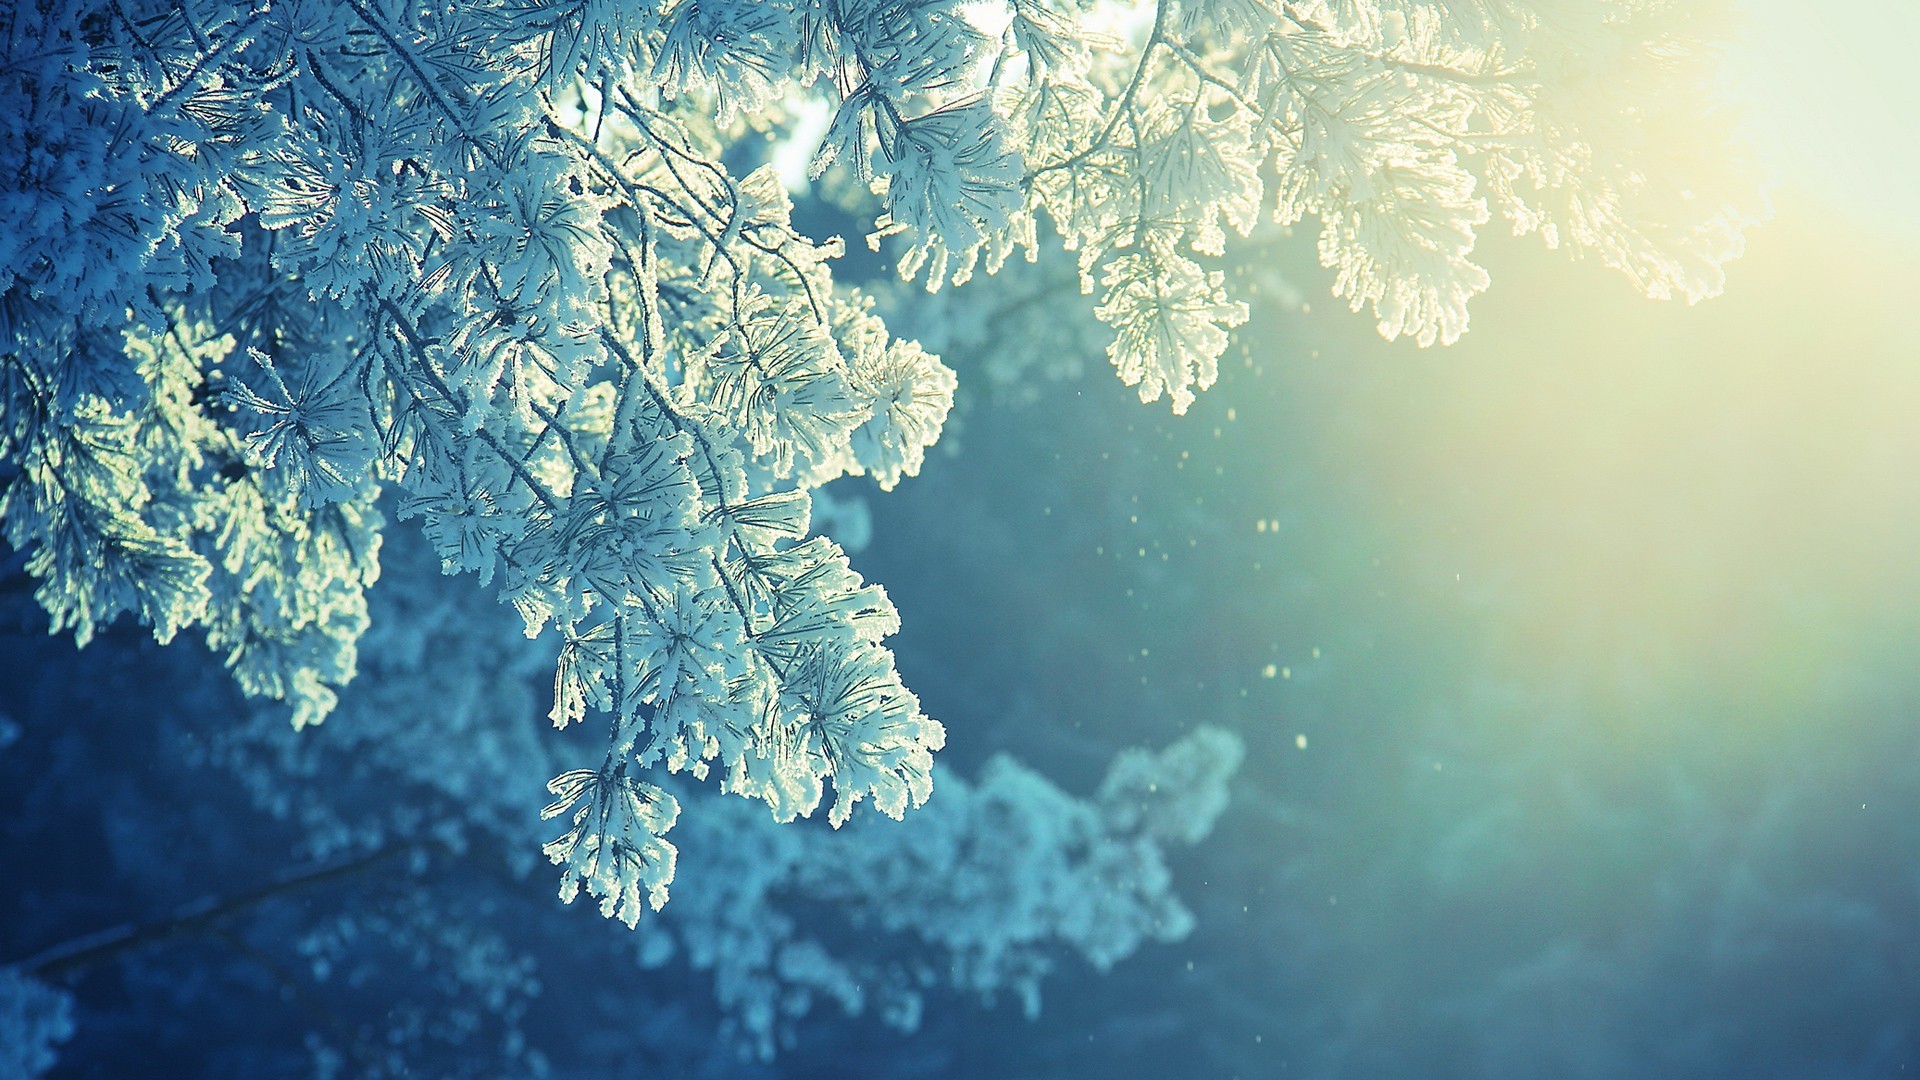 General 1920x1080 nature snow winter cold sunlight peaceful frost trees plants ice cyan blue